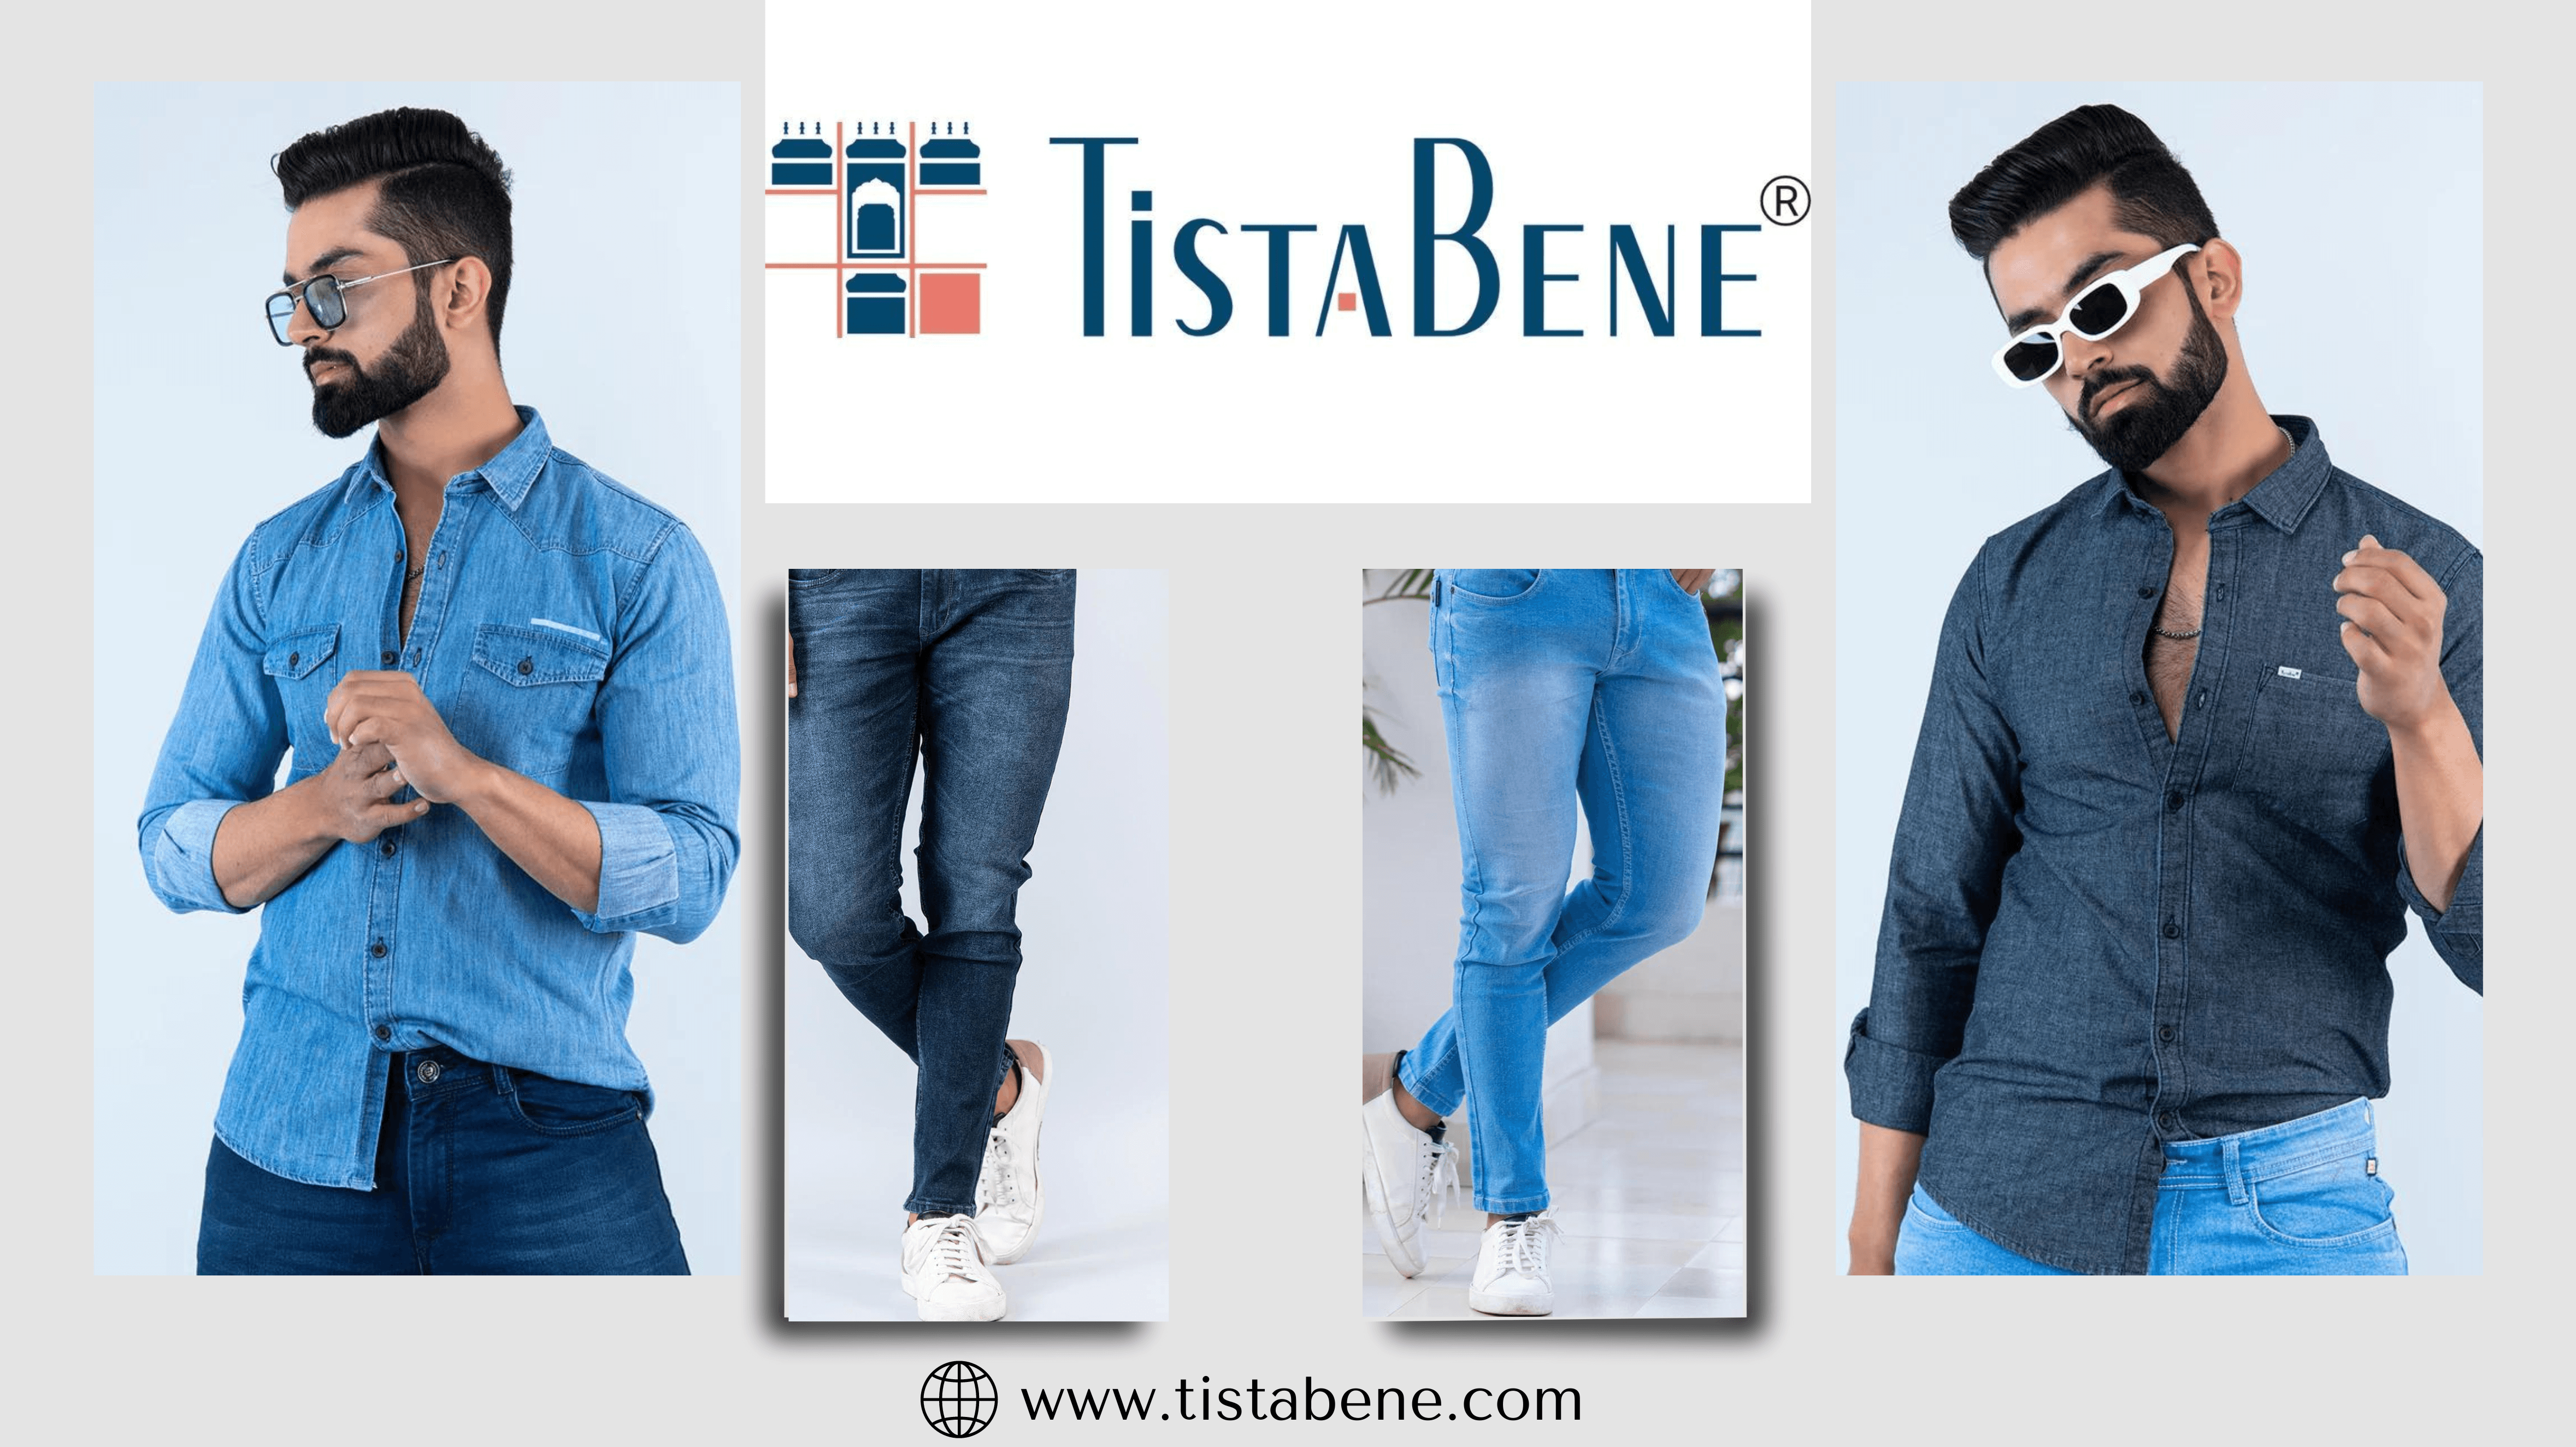 Top 10 Best Trendy Ways to Style Your Jeans Shirts Like a Fashion Pro - Tistabene